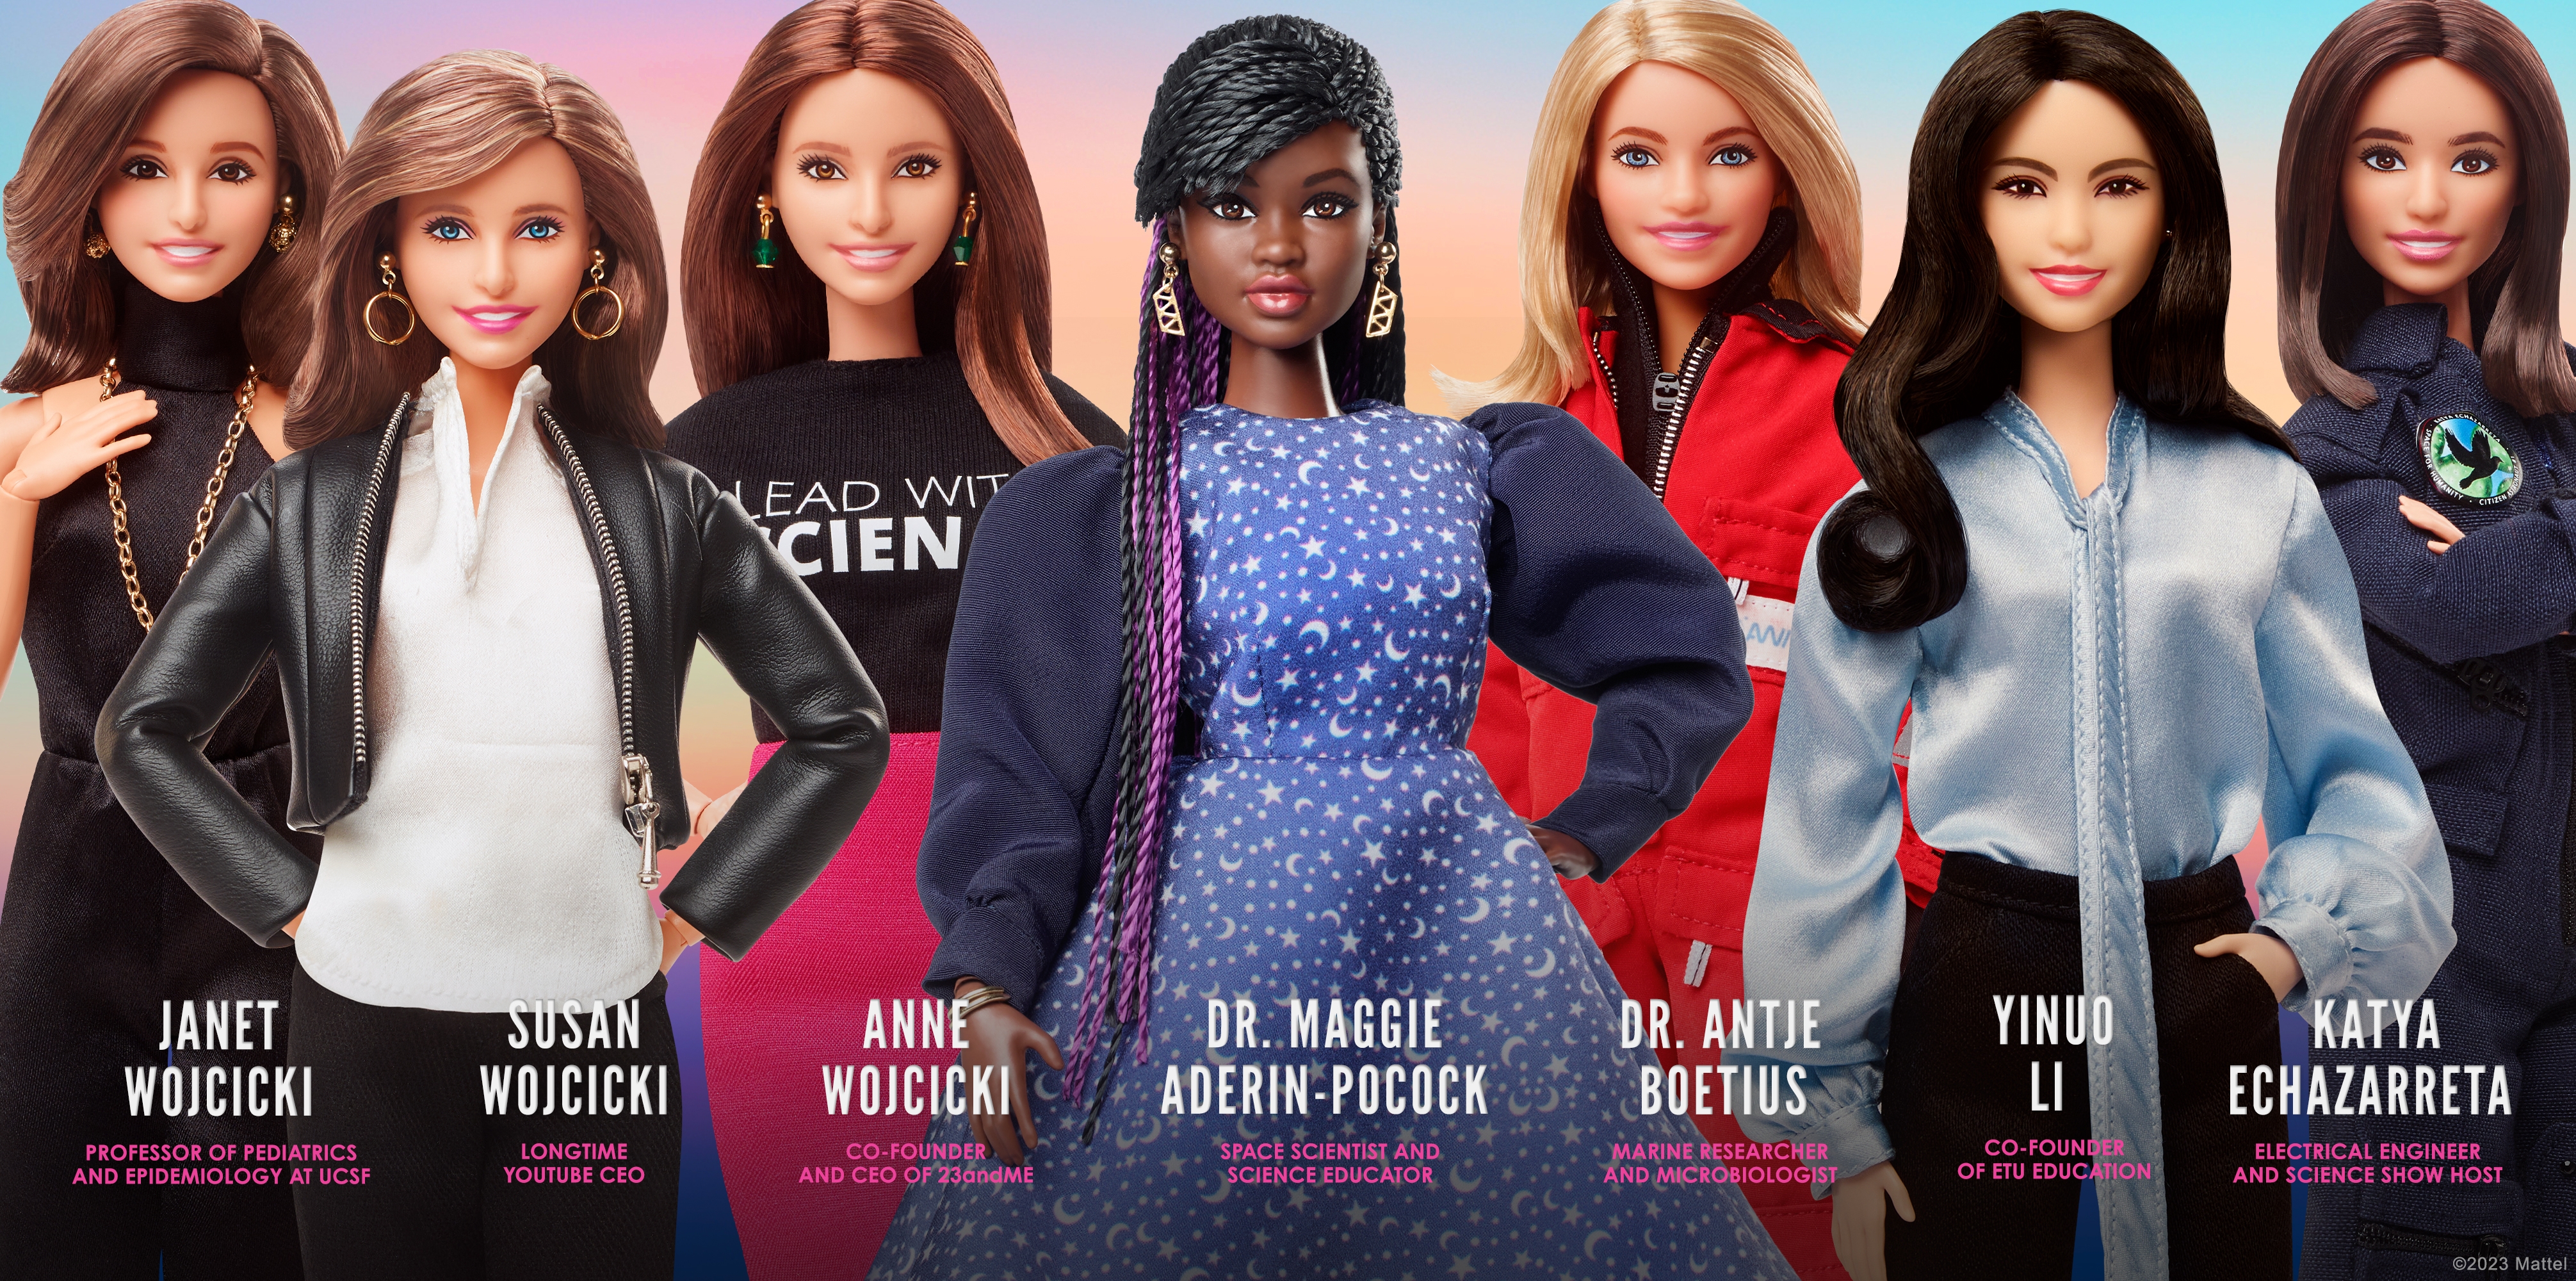 Barbie® Celebrates International Women's Day by Encouraging More Girls to  See Themselves in STEM